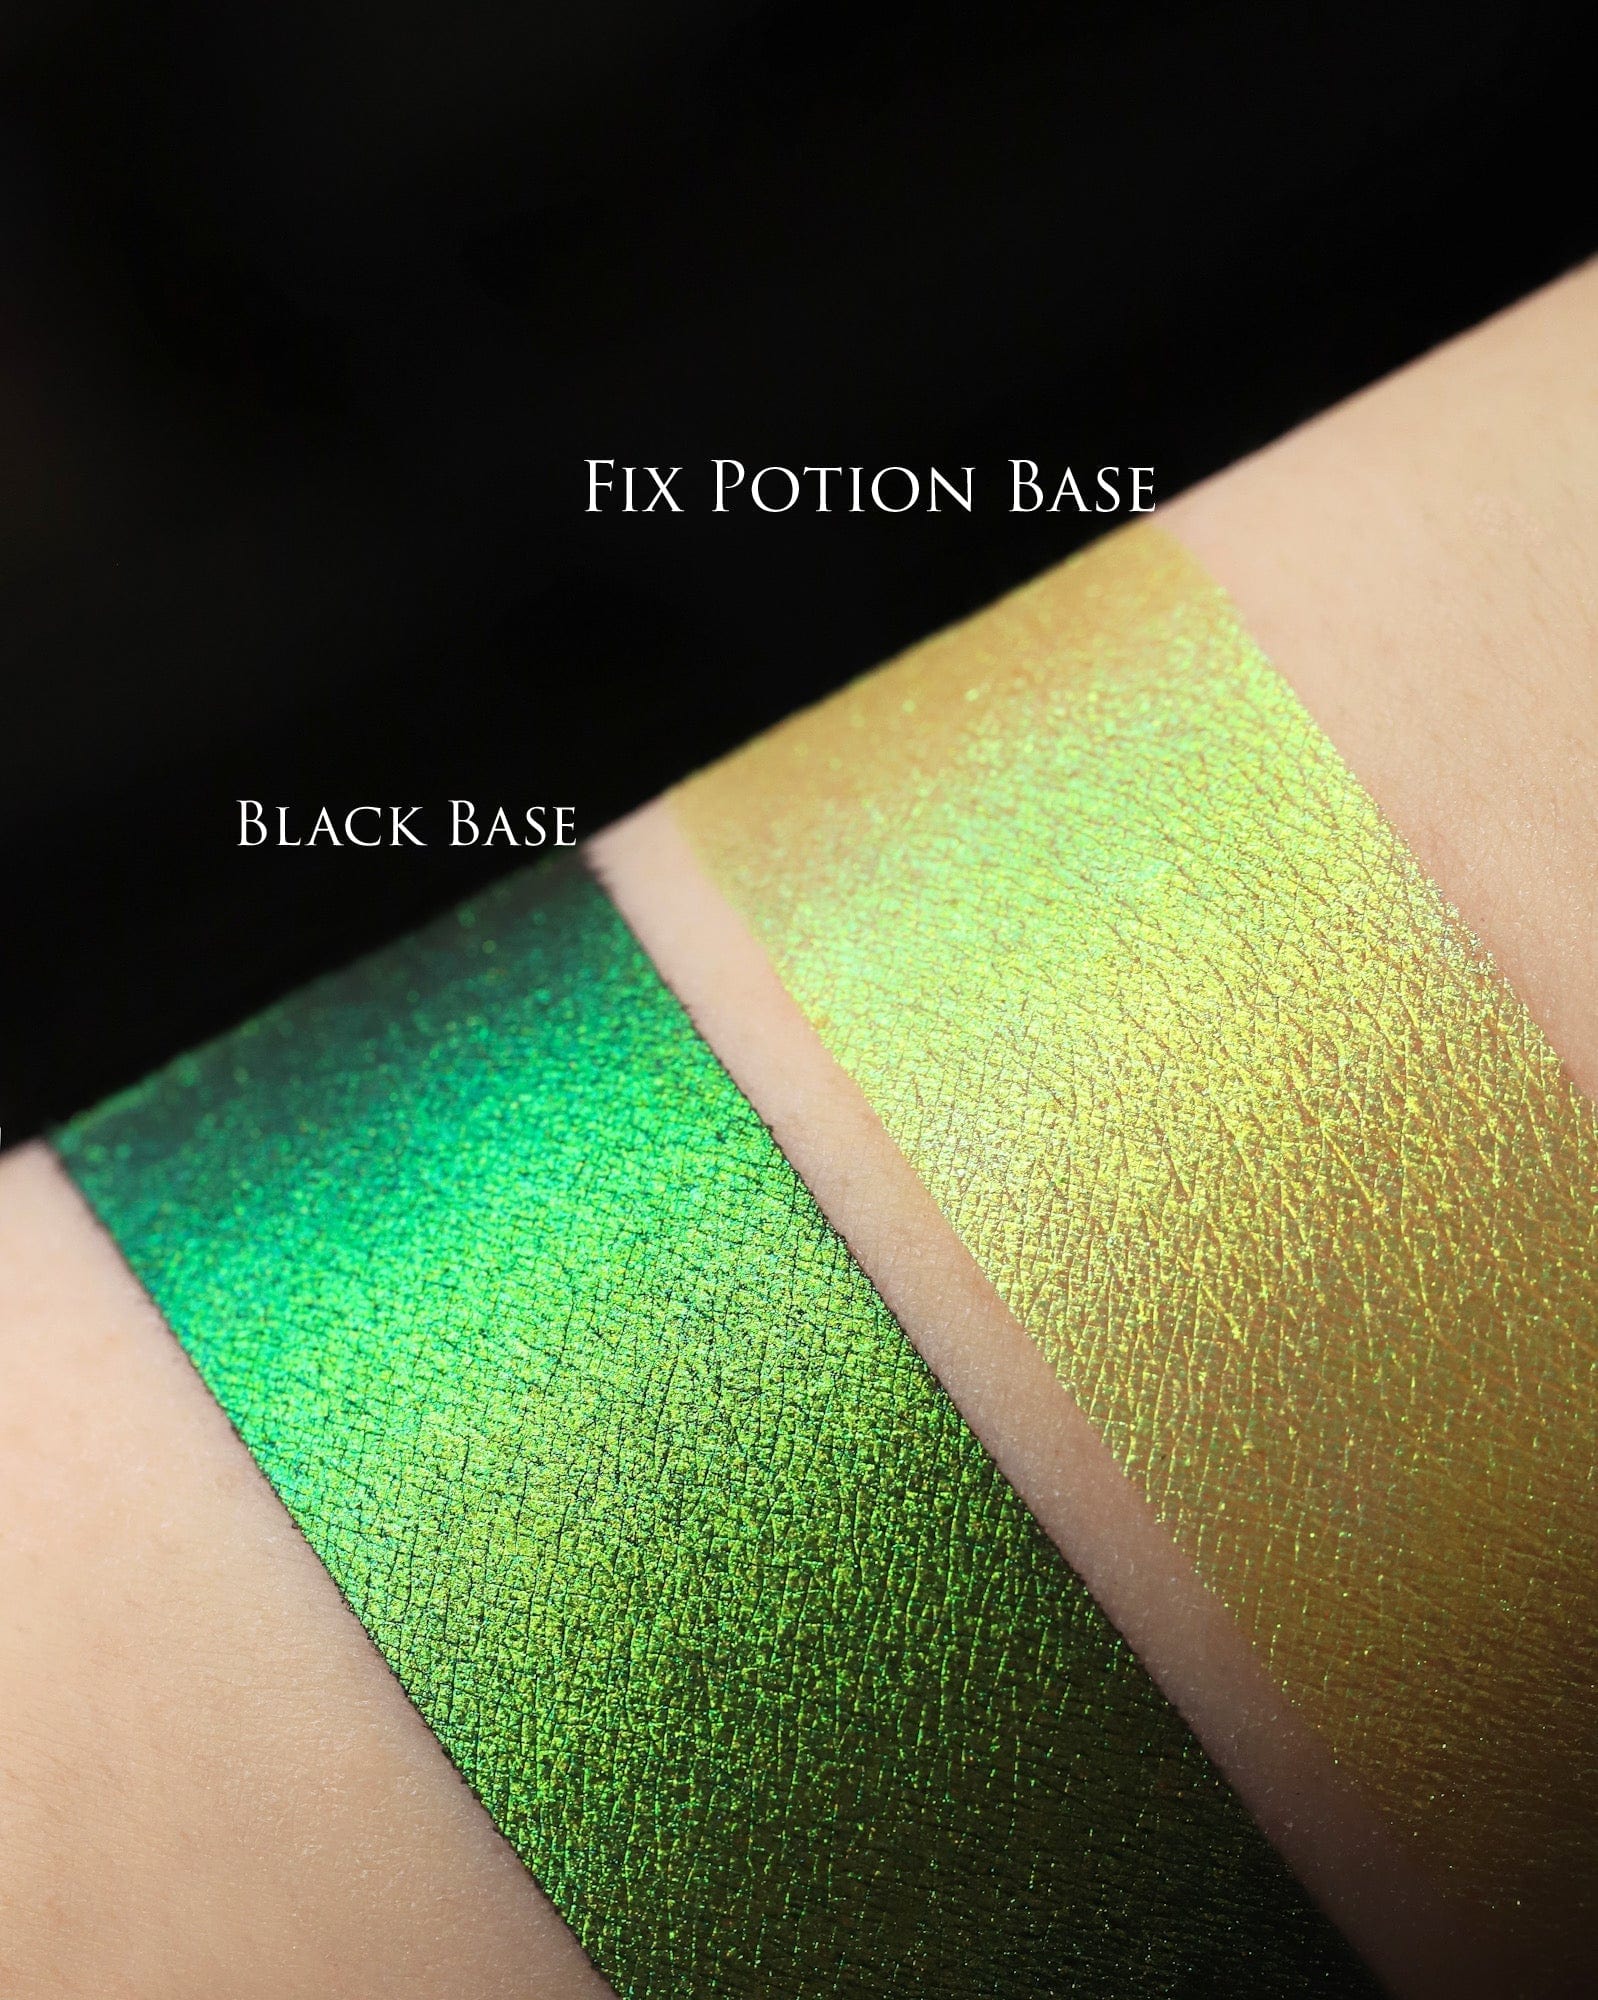 Buttercup Pastel Duochrome Eyeshadow Eyeshadow Karla Cosmetics Buttercup **WITH FIX POTION** 